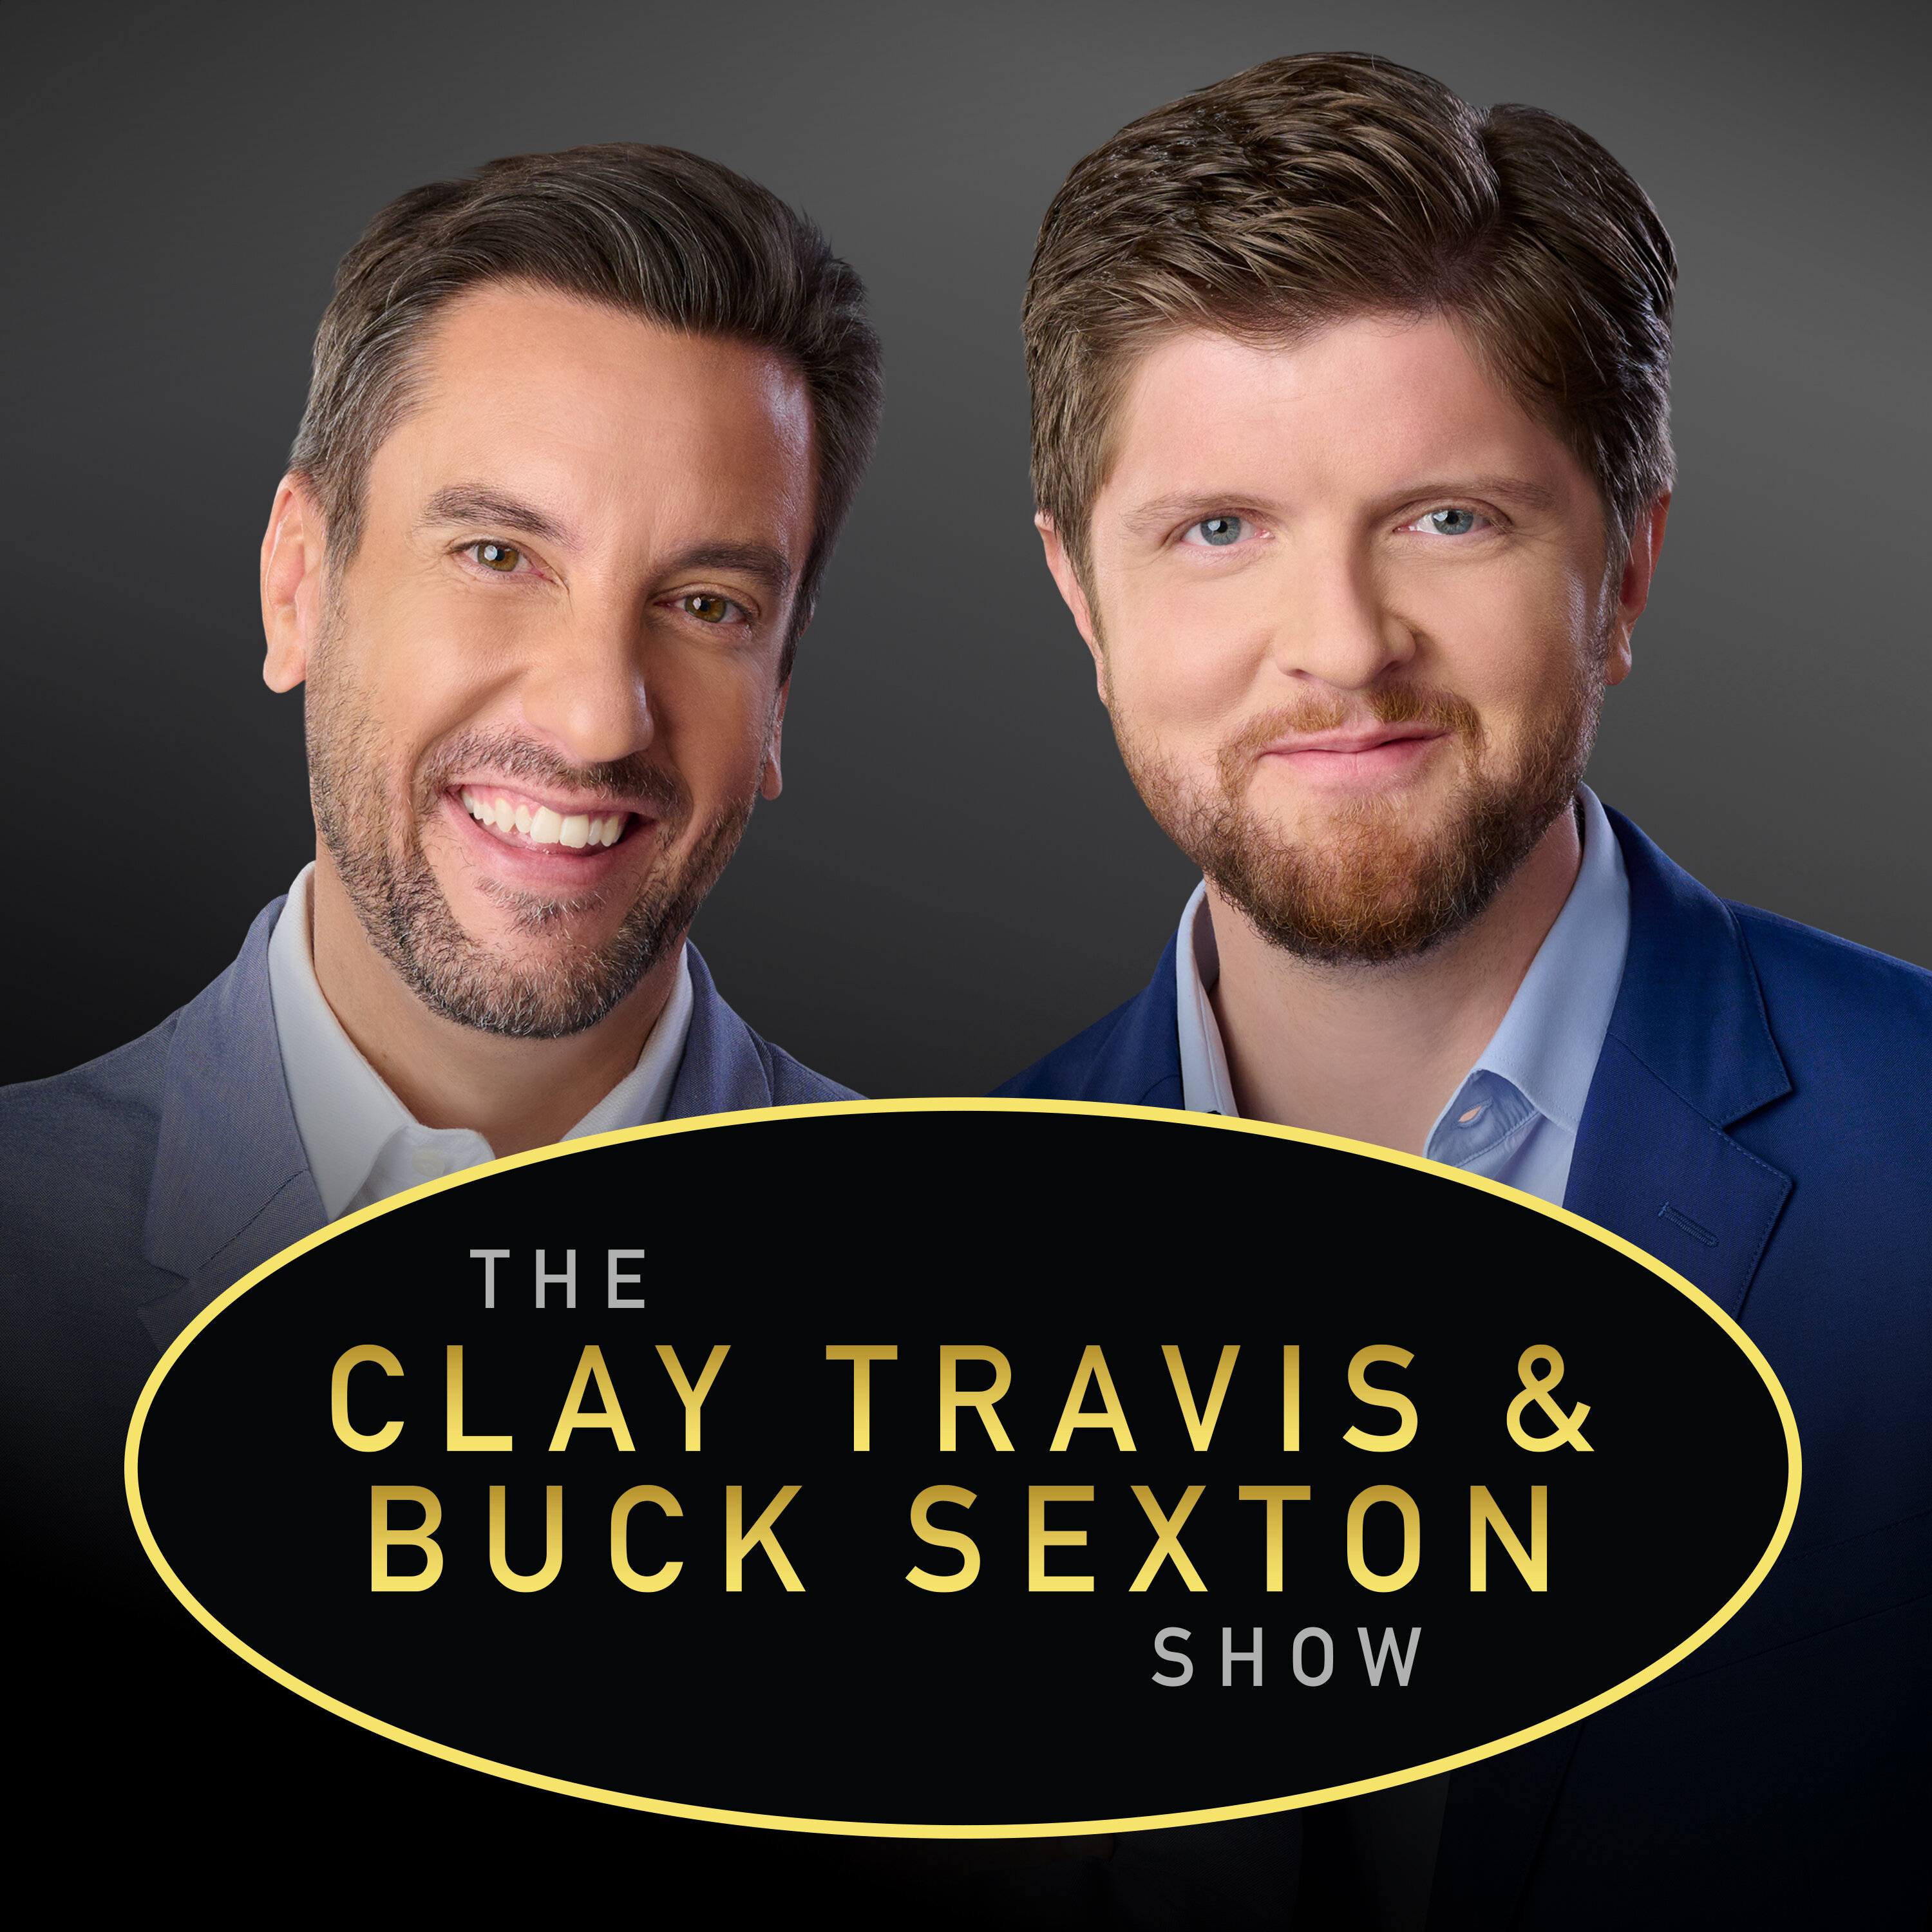 Clay Travis and Buck Sexton Show H1 – Aug 12 2022